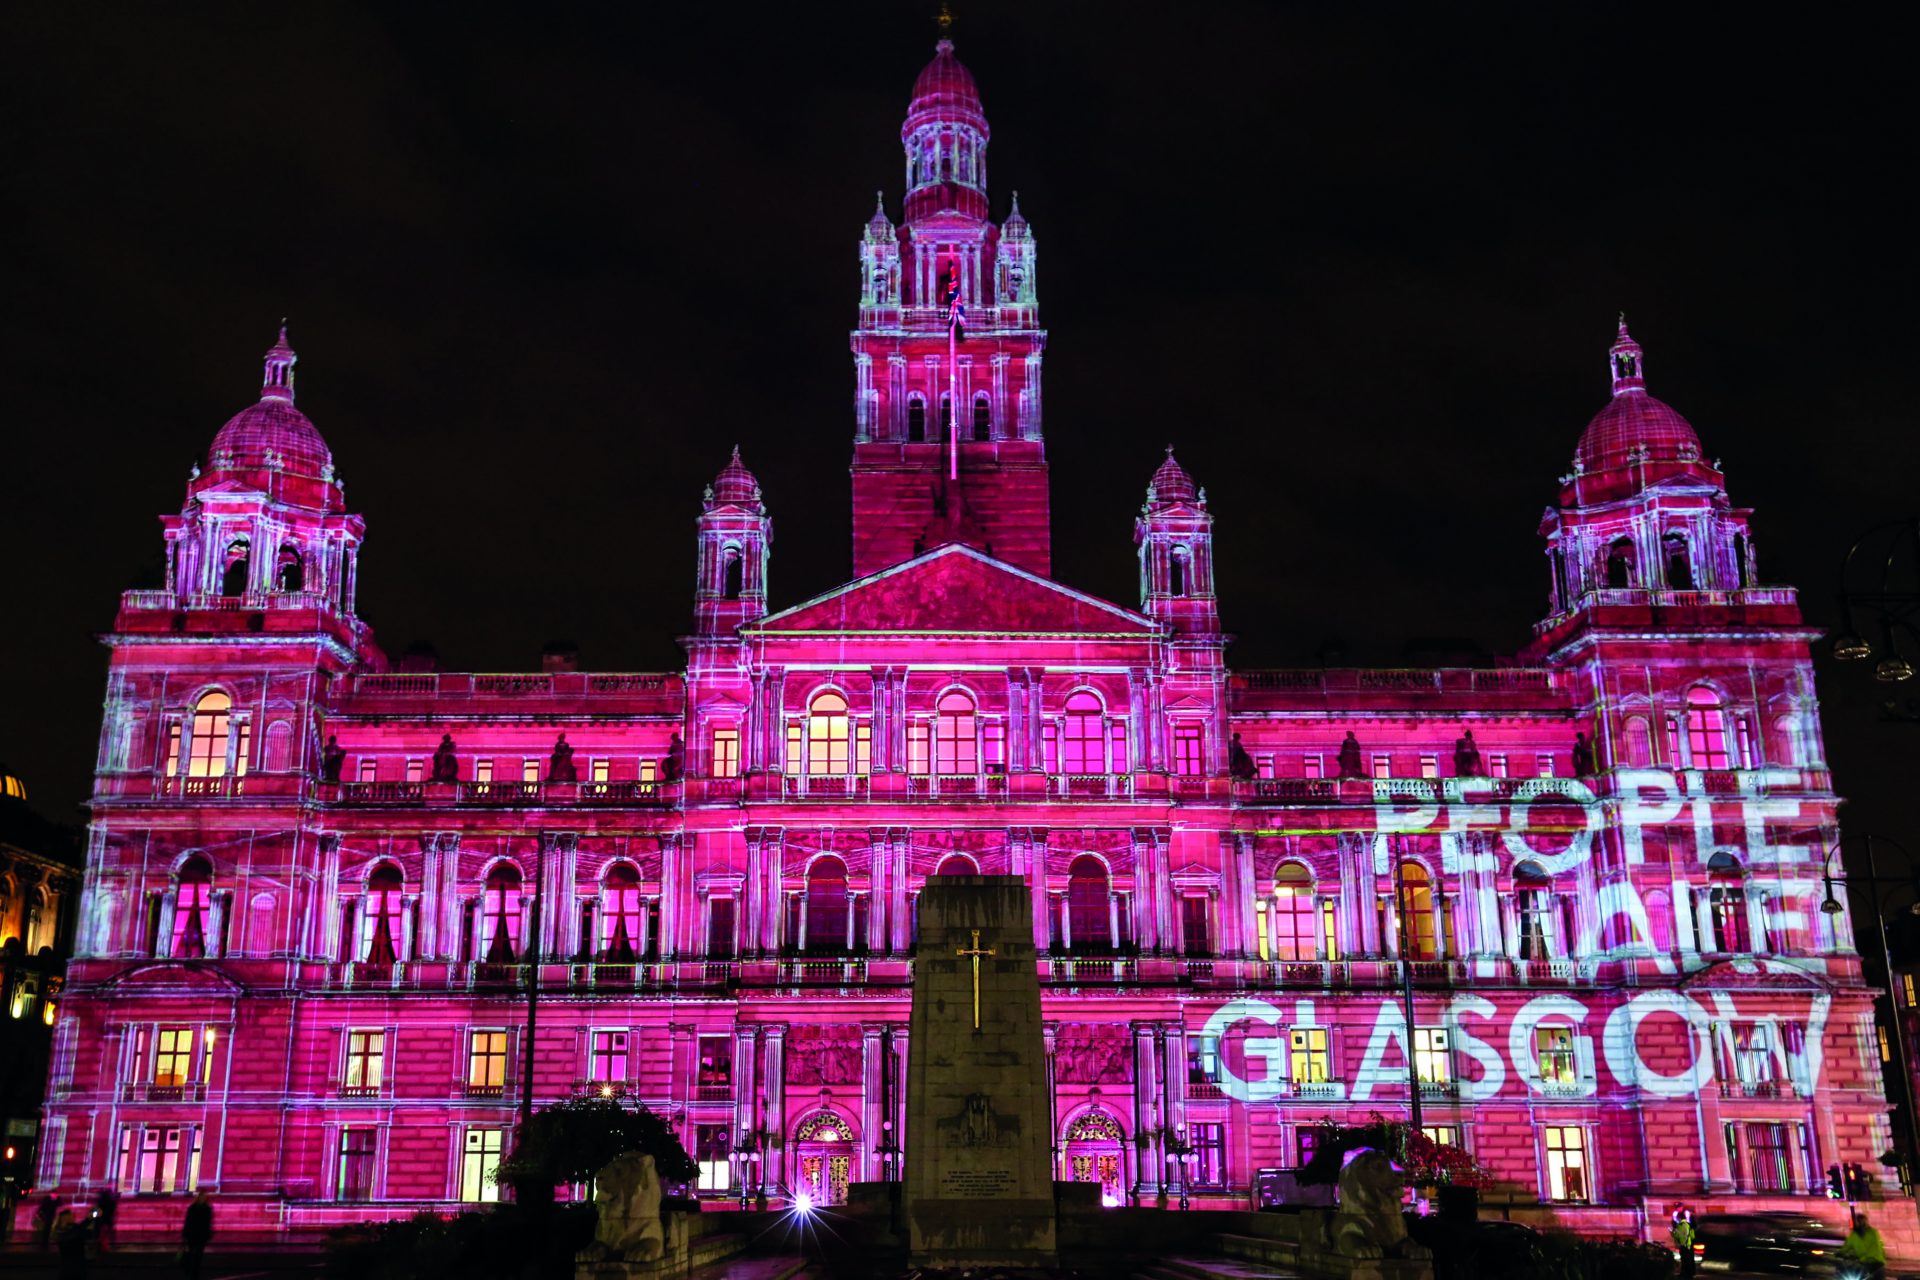 A picture of a building at night- it is lit up in pink with the words 'people make Glasgow' projected on the outside of the building.